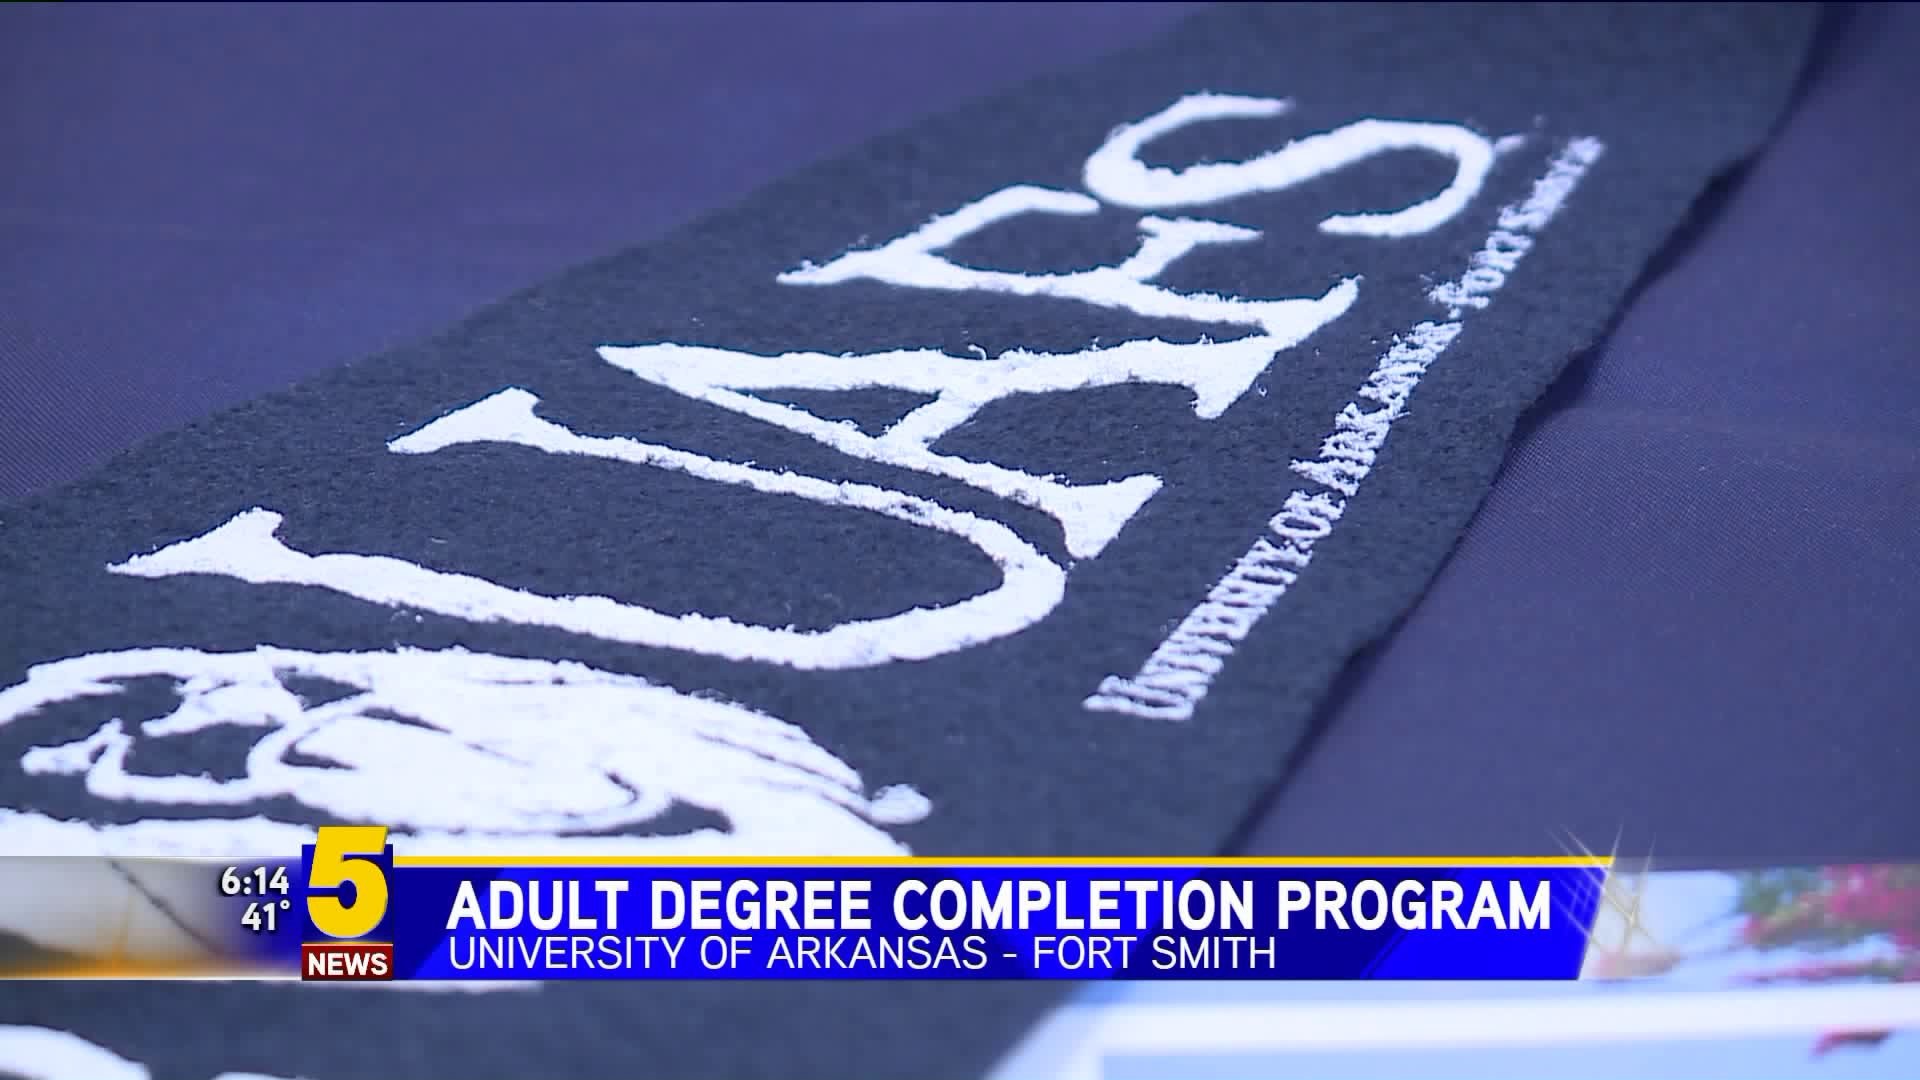 Adult Degree Completion Program Offered At UAFS